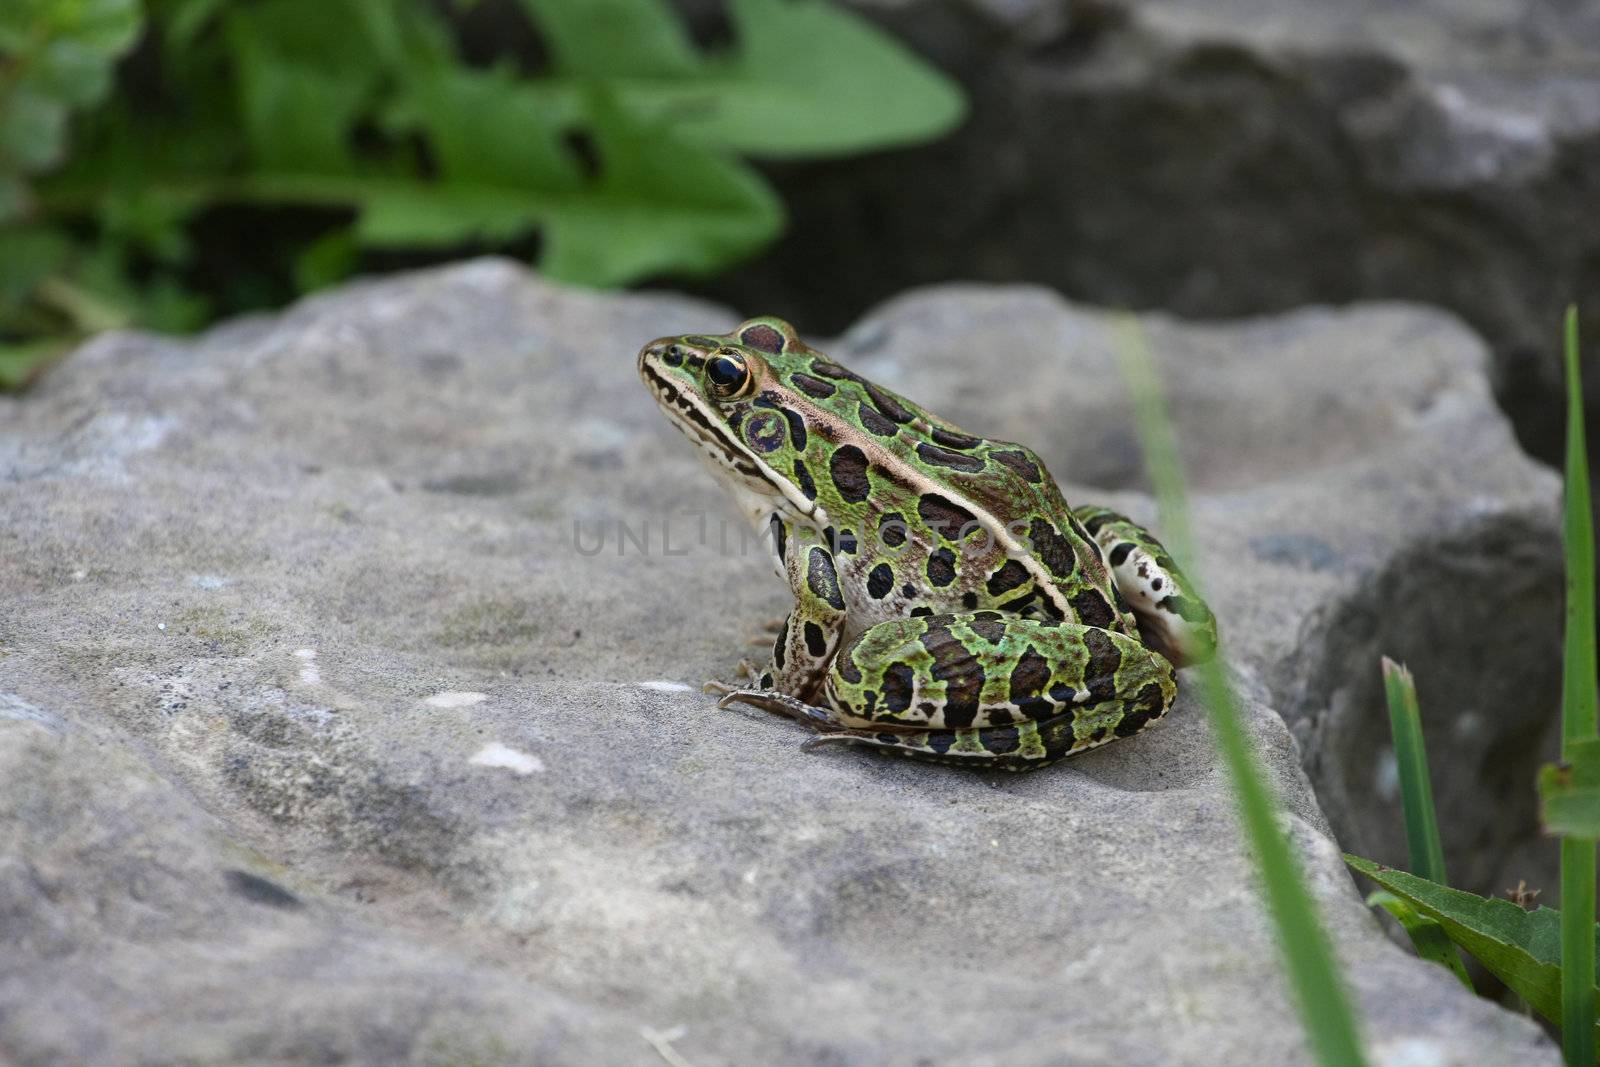 Leopard Frog on flat stone  at garden edge